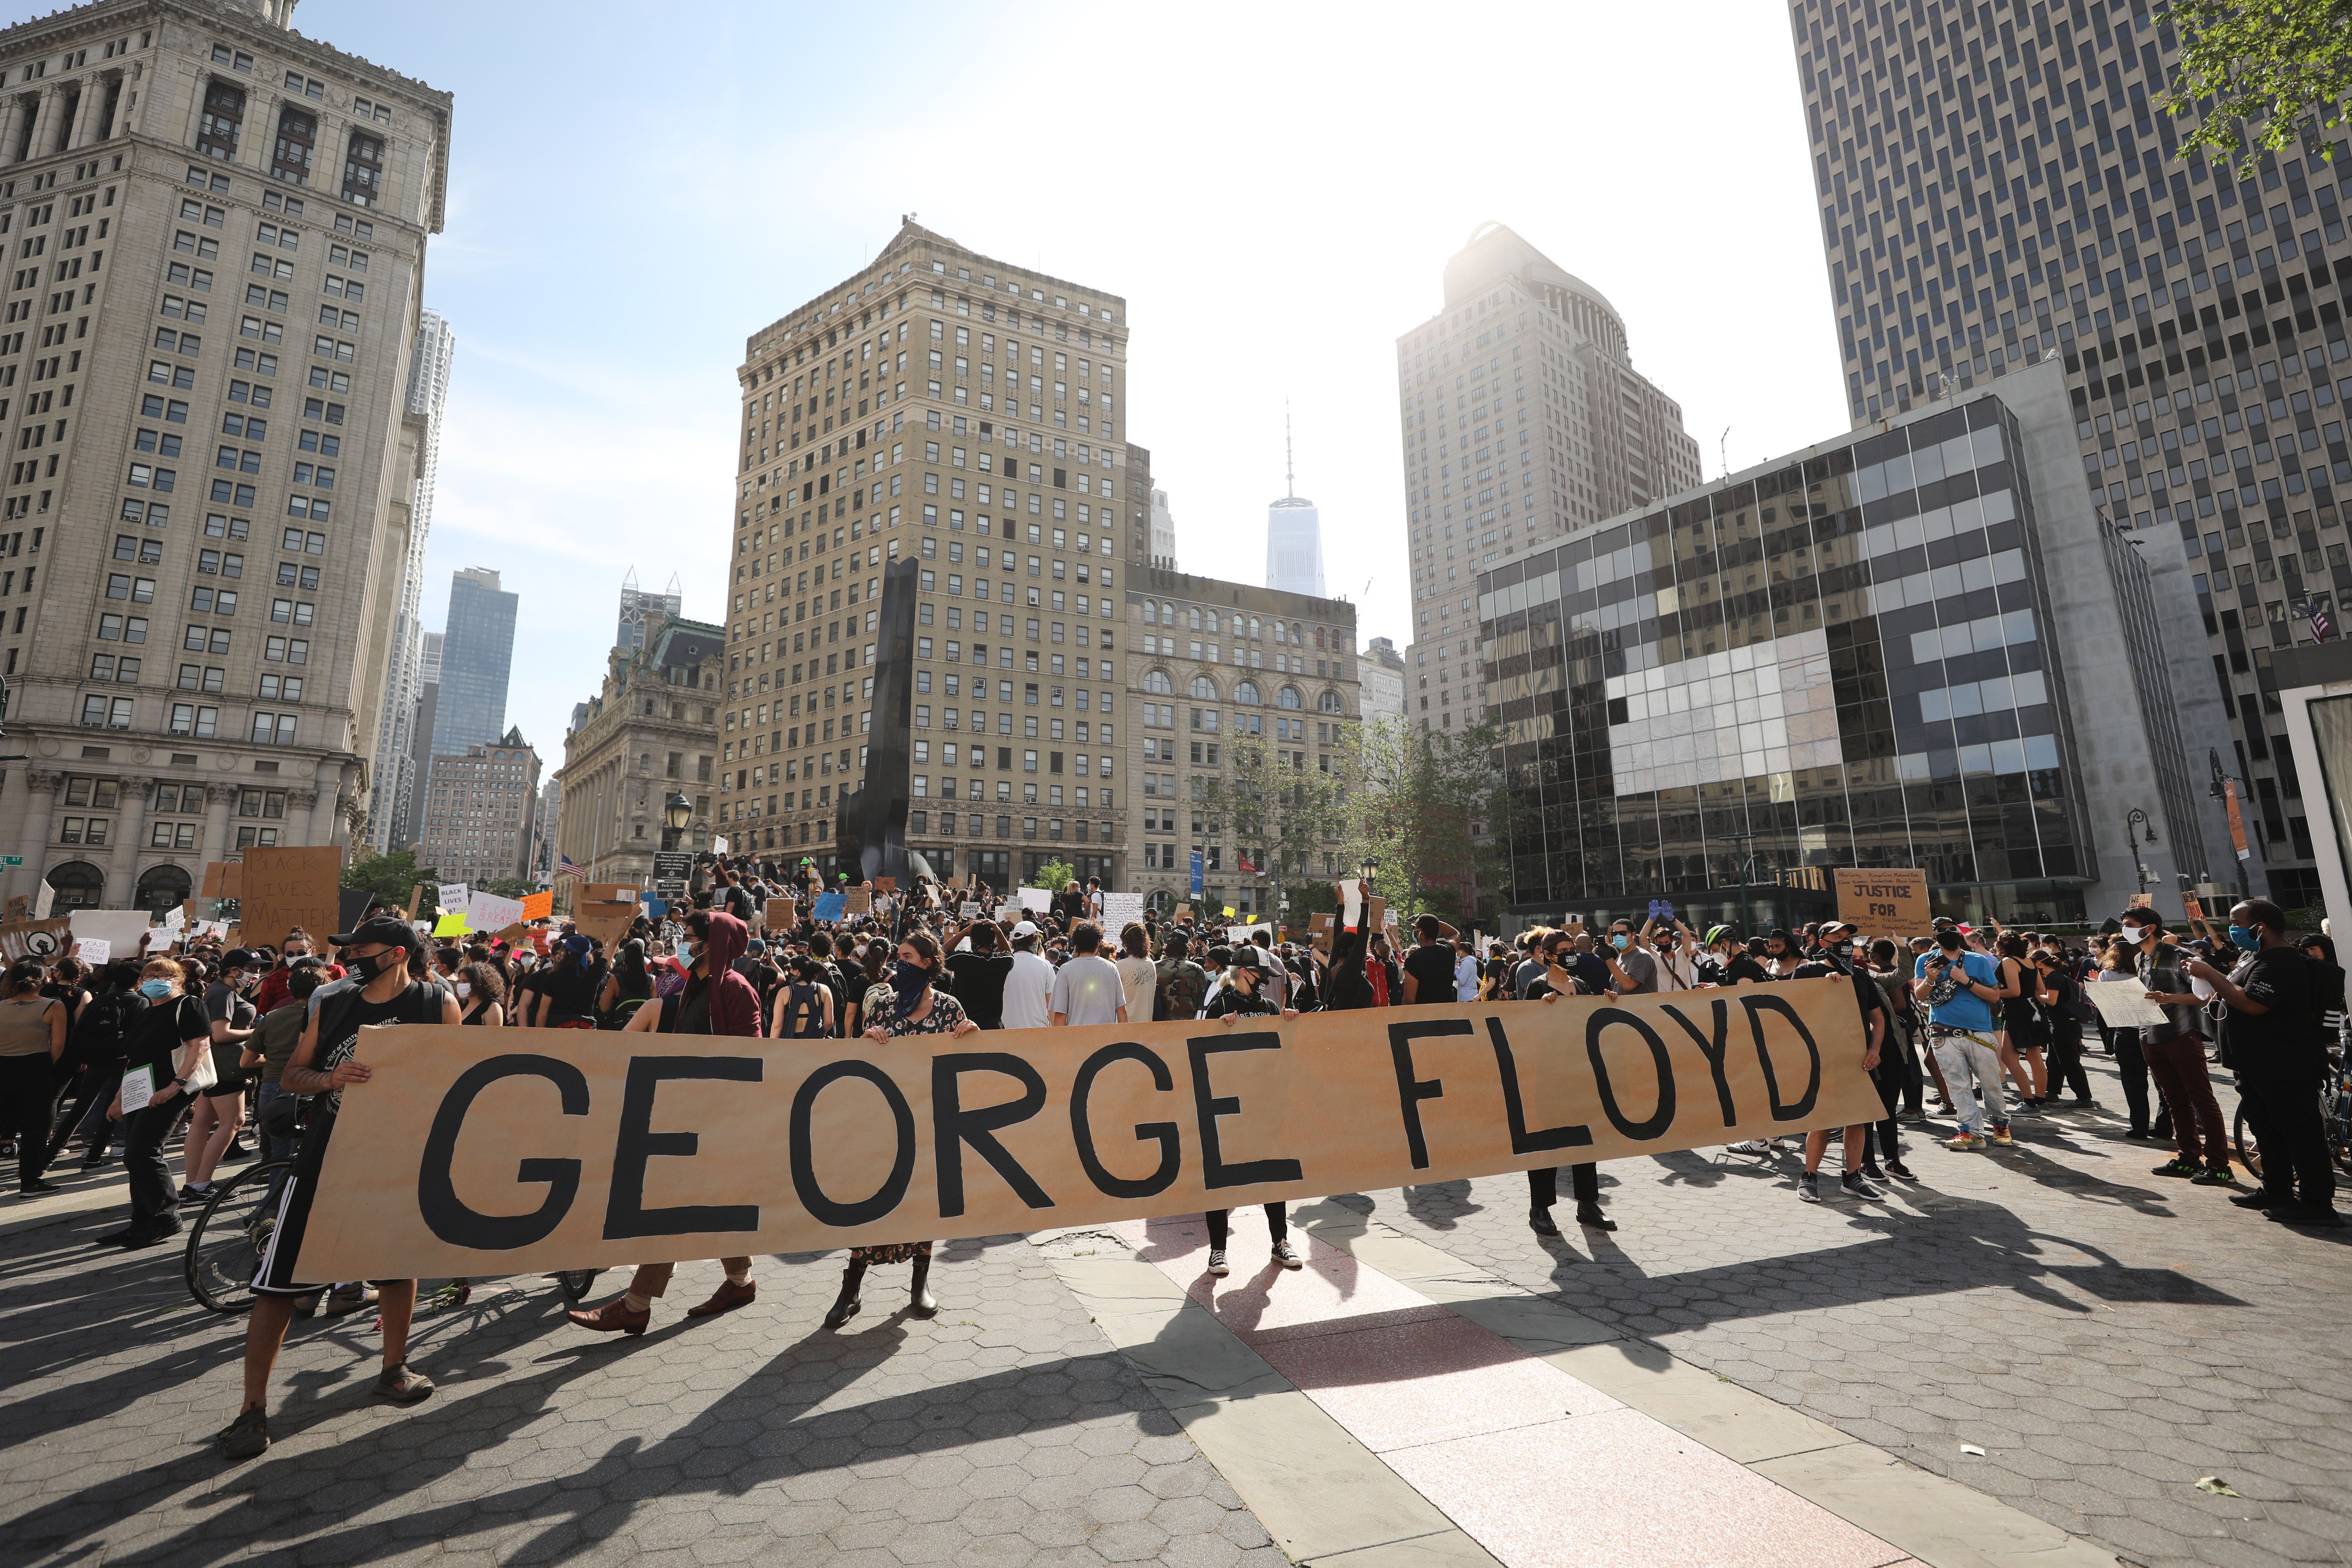 Protesters speak out for George Floyd, who died in police custody.